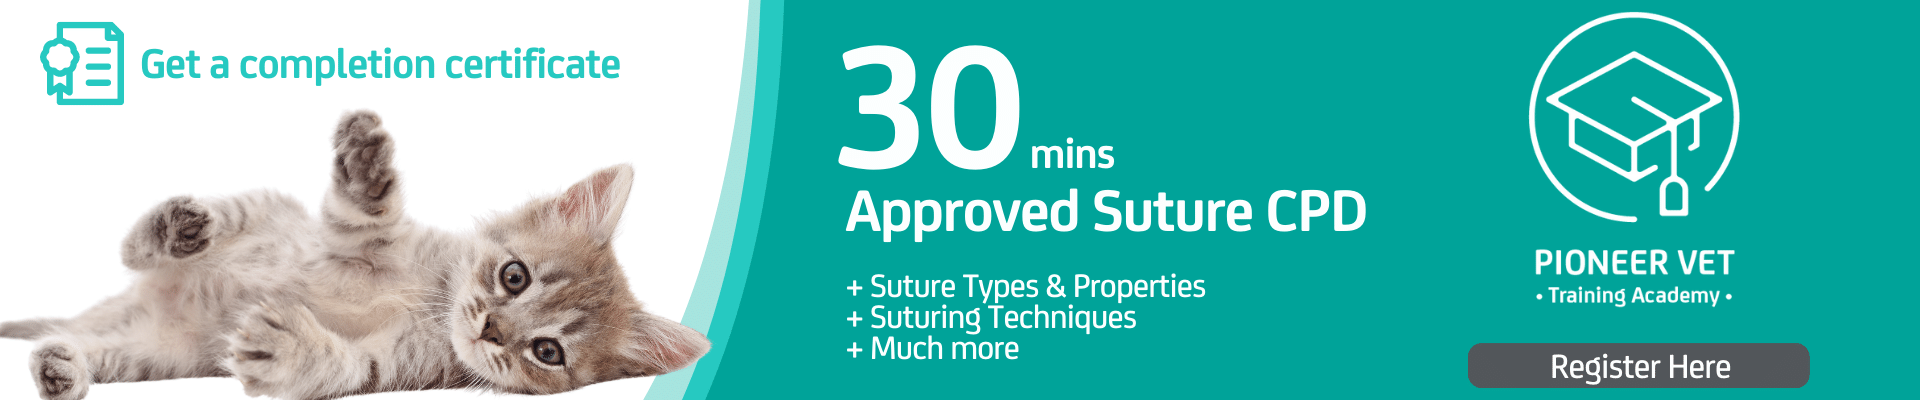 Approved Suture CPD